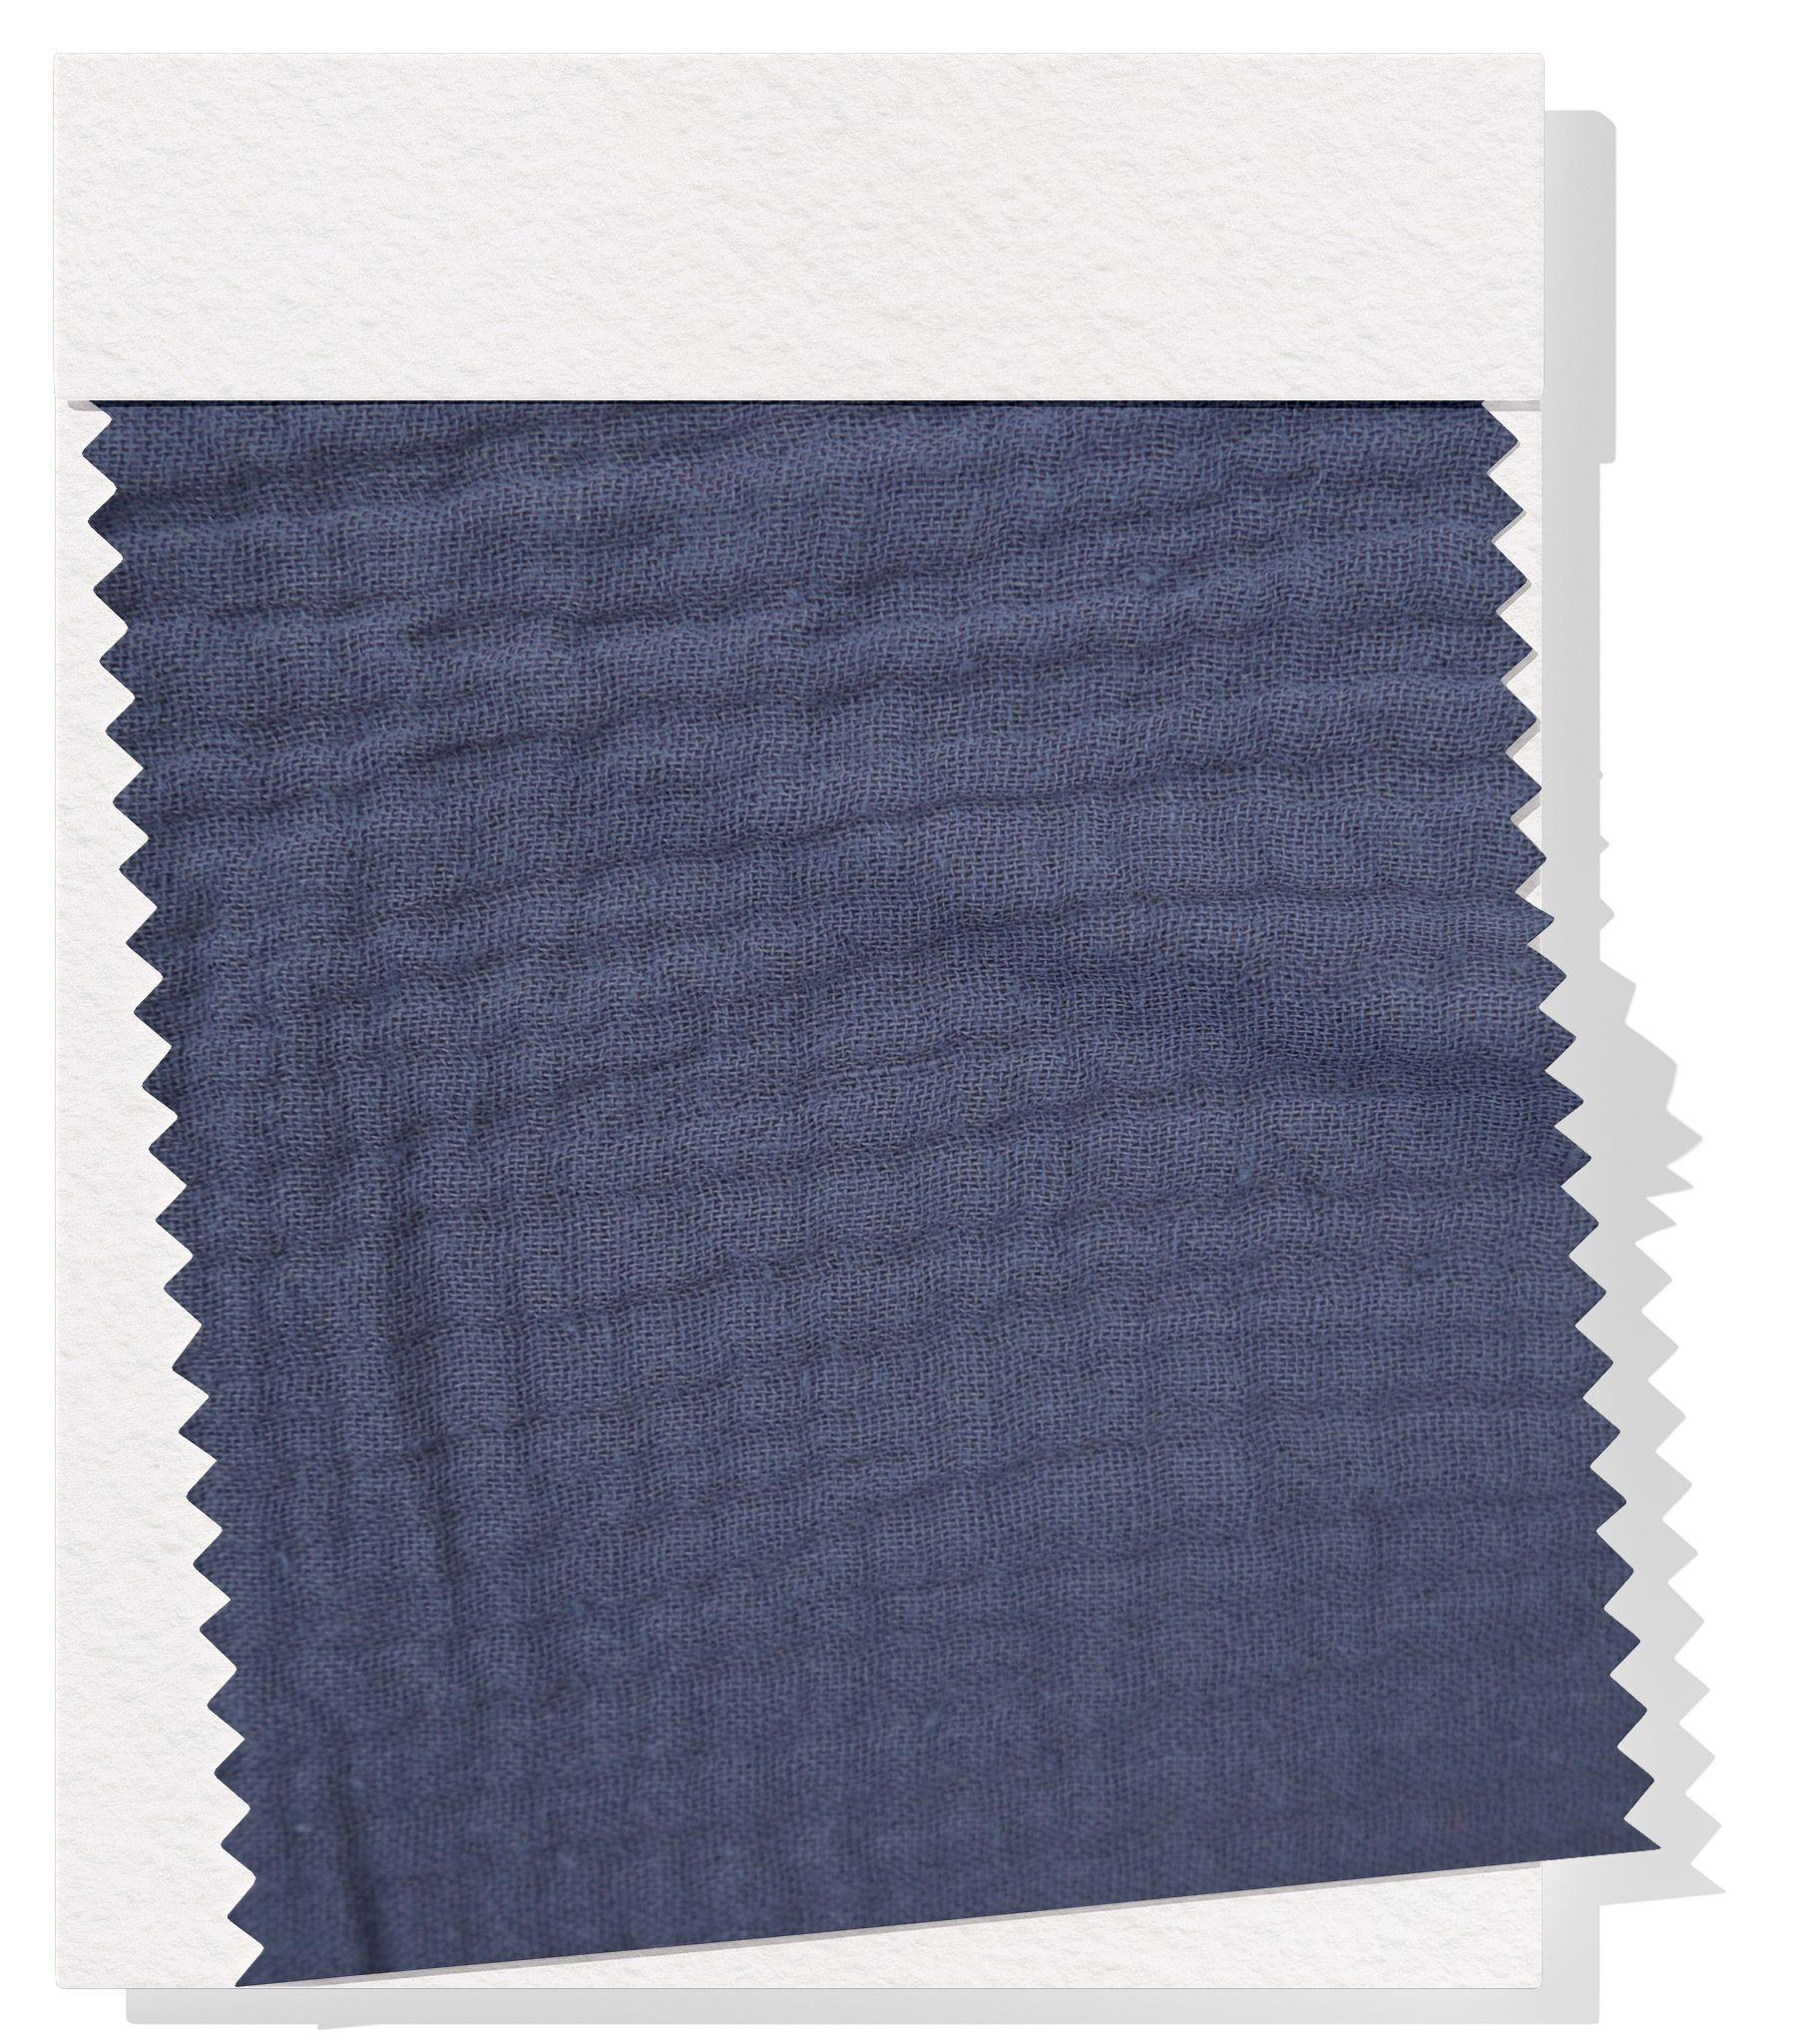 Double Muslin $14.00p/m - Washed Navy